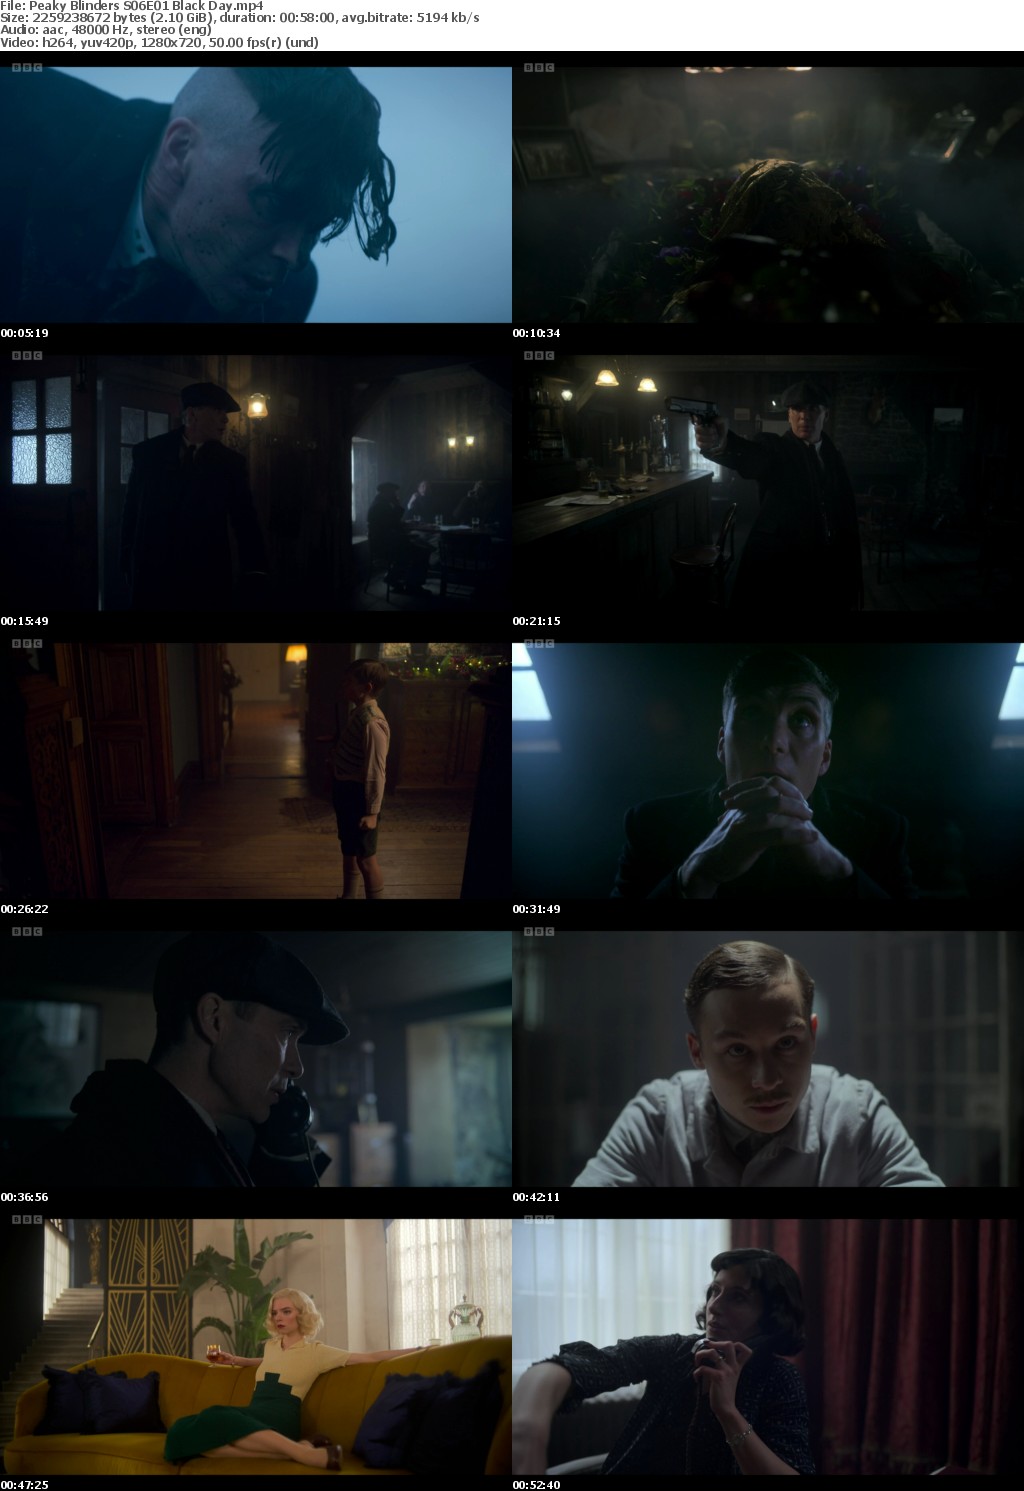 Peaky Blinders S06E01 Black Day (1280x720p HD, 50fps, soft Eng subs)